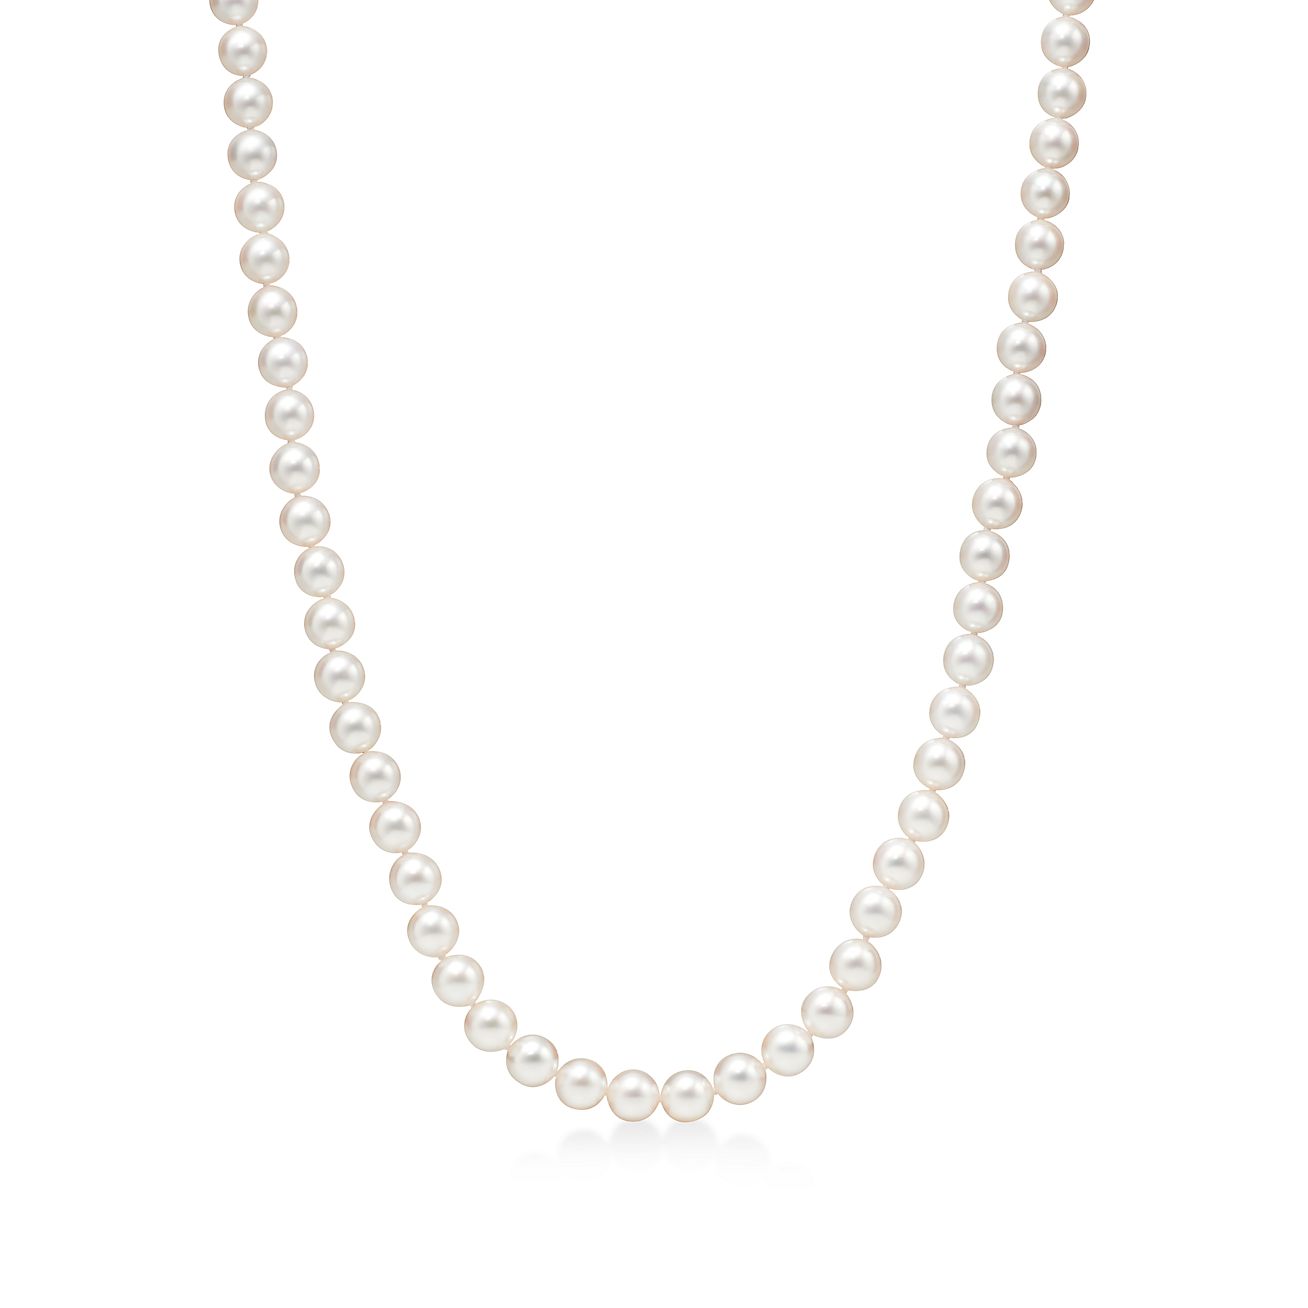 Tiffany Essential Pearls necklace of Akoya pearls with an 18k white gold clasp. | Tiffany & Co.